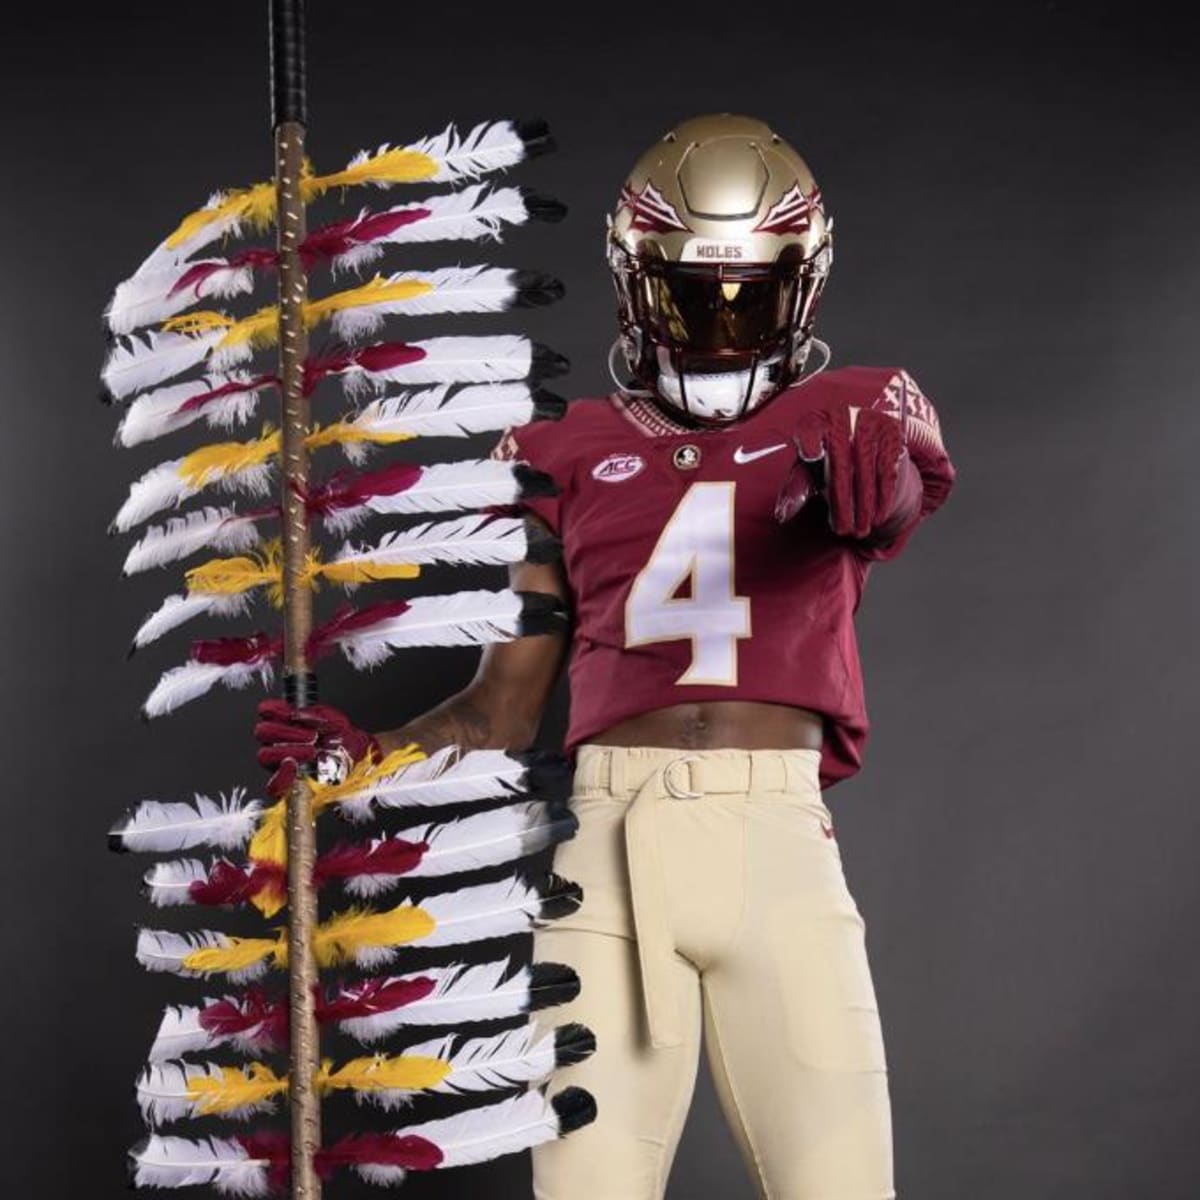 Florida State Uniform Database – A visual history of Florida State